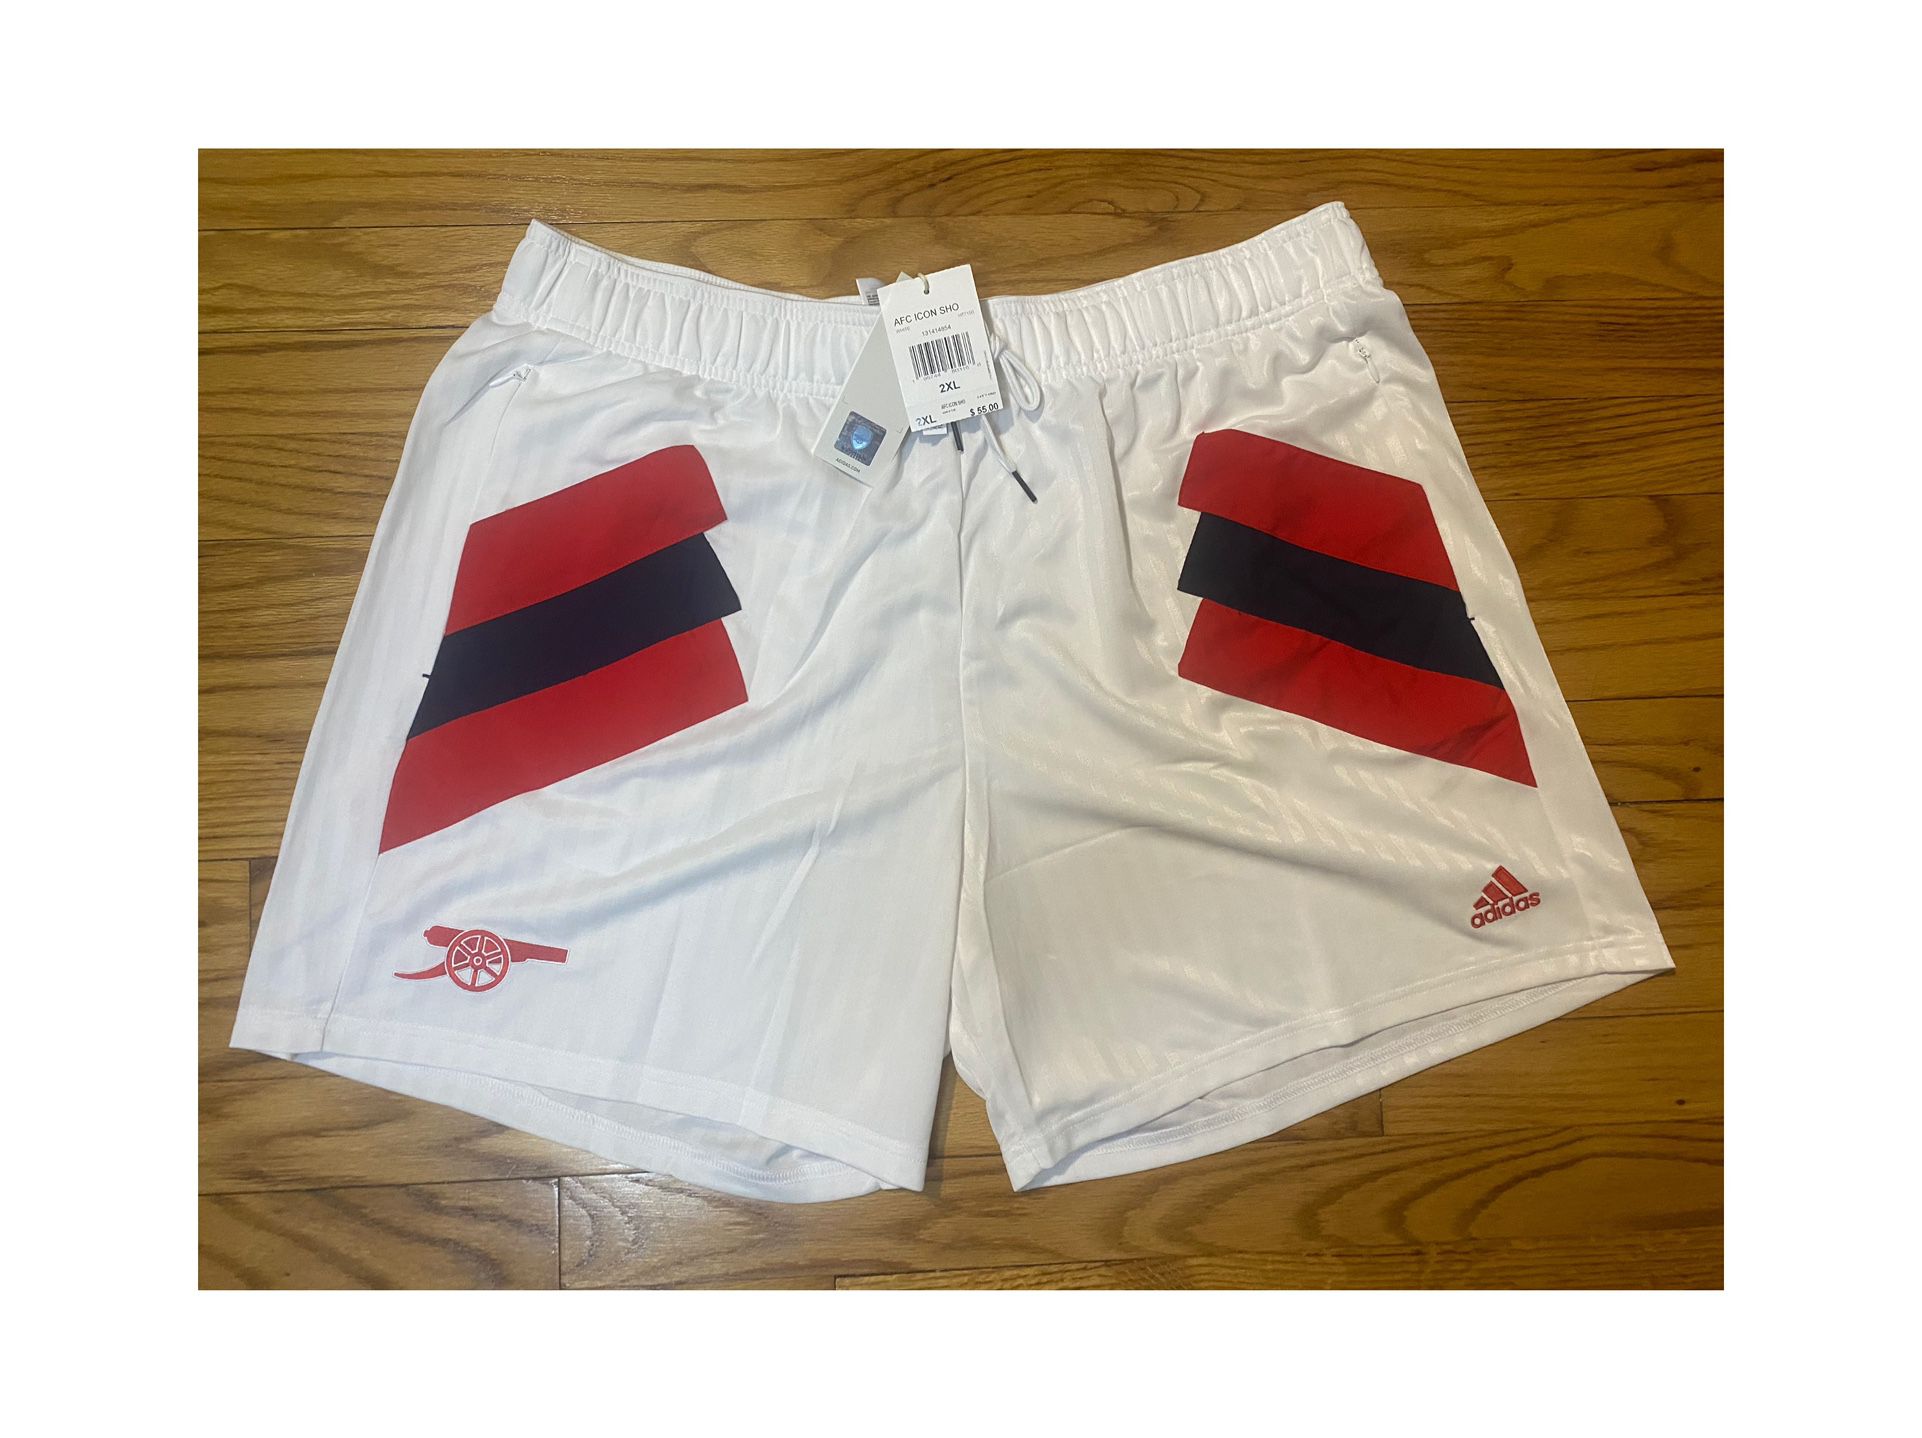 ADIDAS ARSENAL ICON SHORT MEN’S Size 2XL New With Tags! 